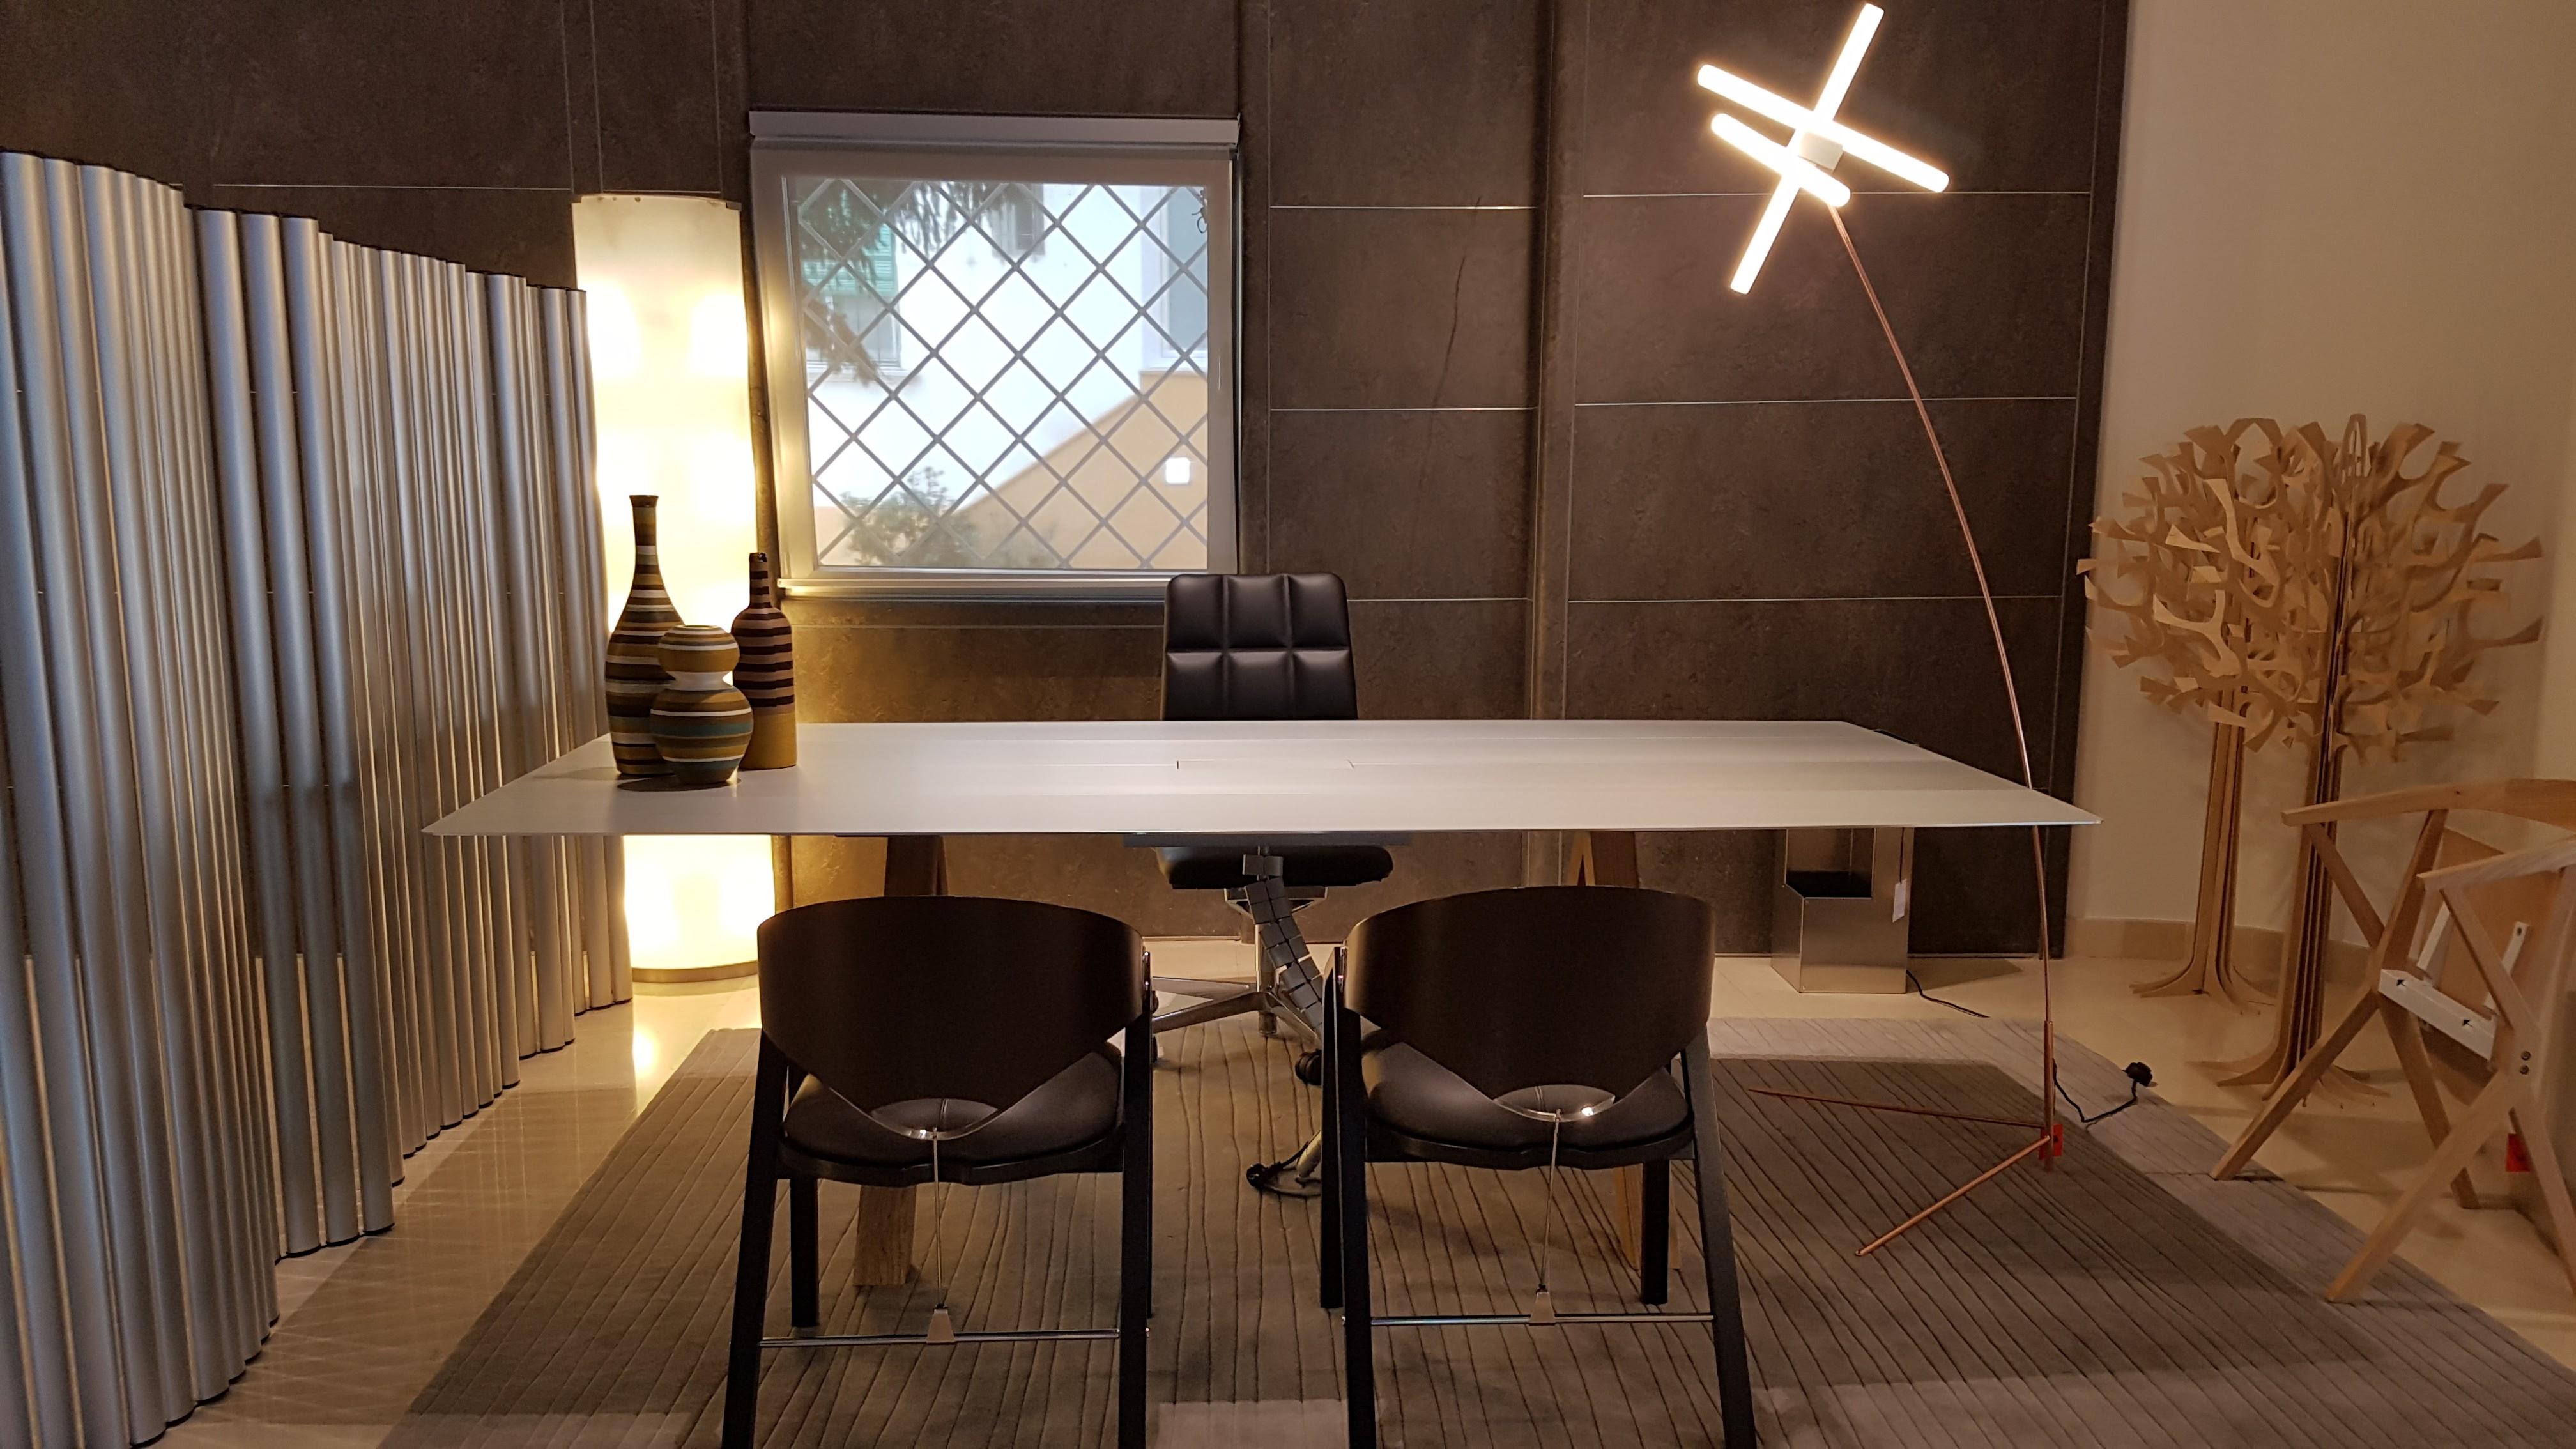 Spanish Contemporary workplace or dining table, 